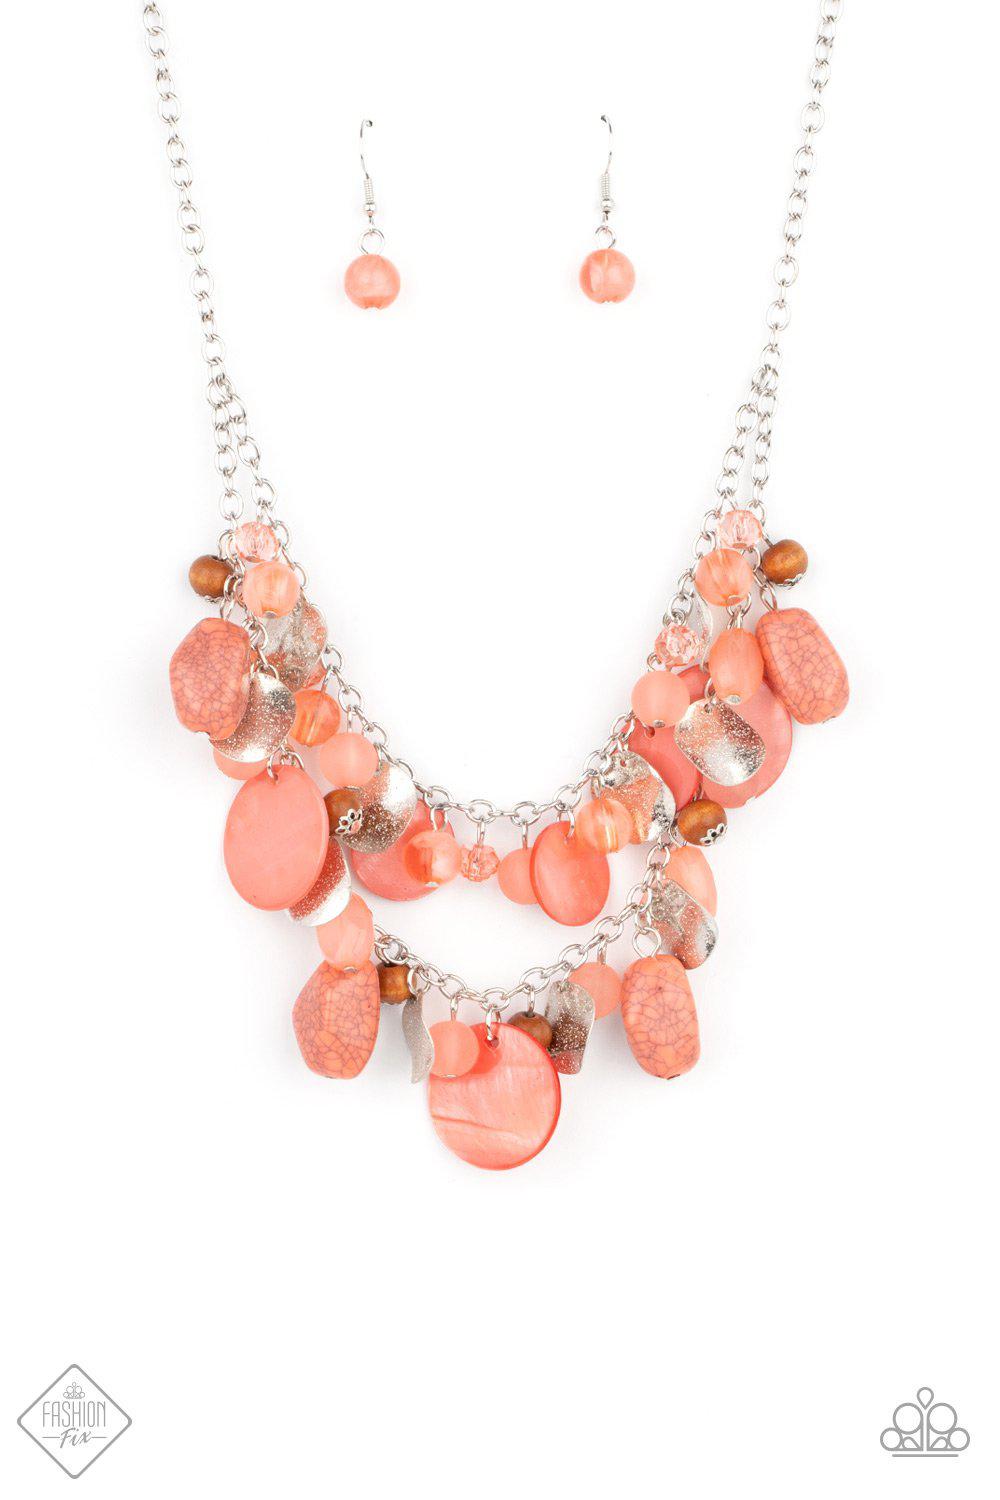 Spring Goddess Coral Bead, Stone and Wood Necklace - Paparazzi Accessories- lightbox - CarasShop.com - $5 Jewelry by Cara Jewels